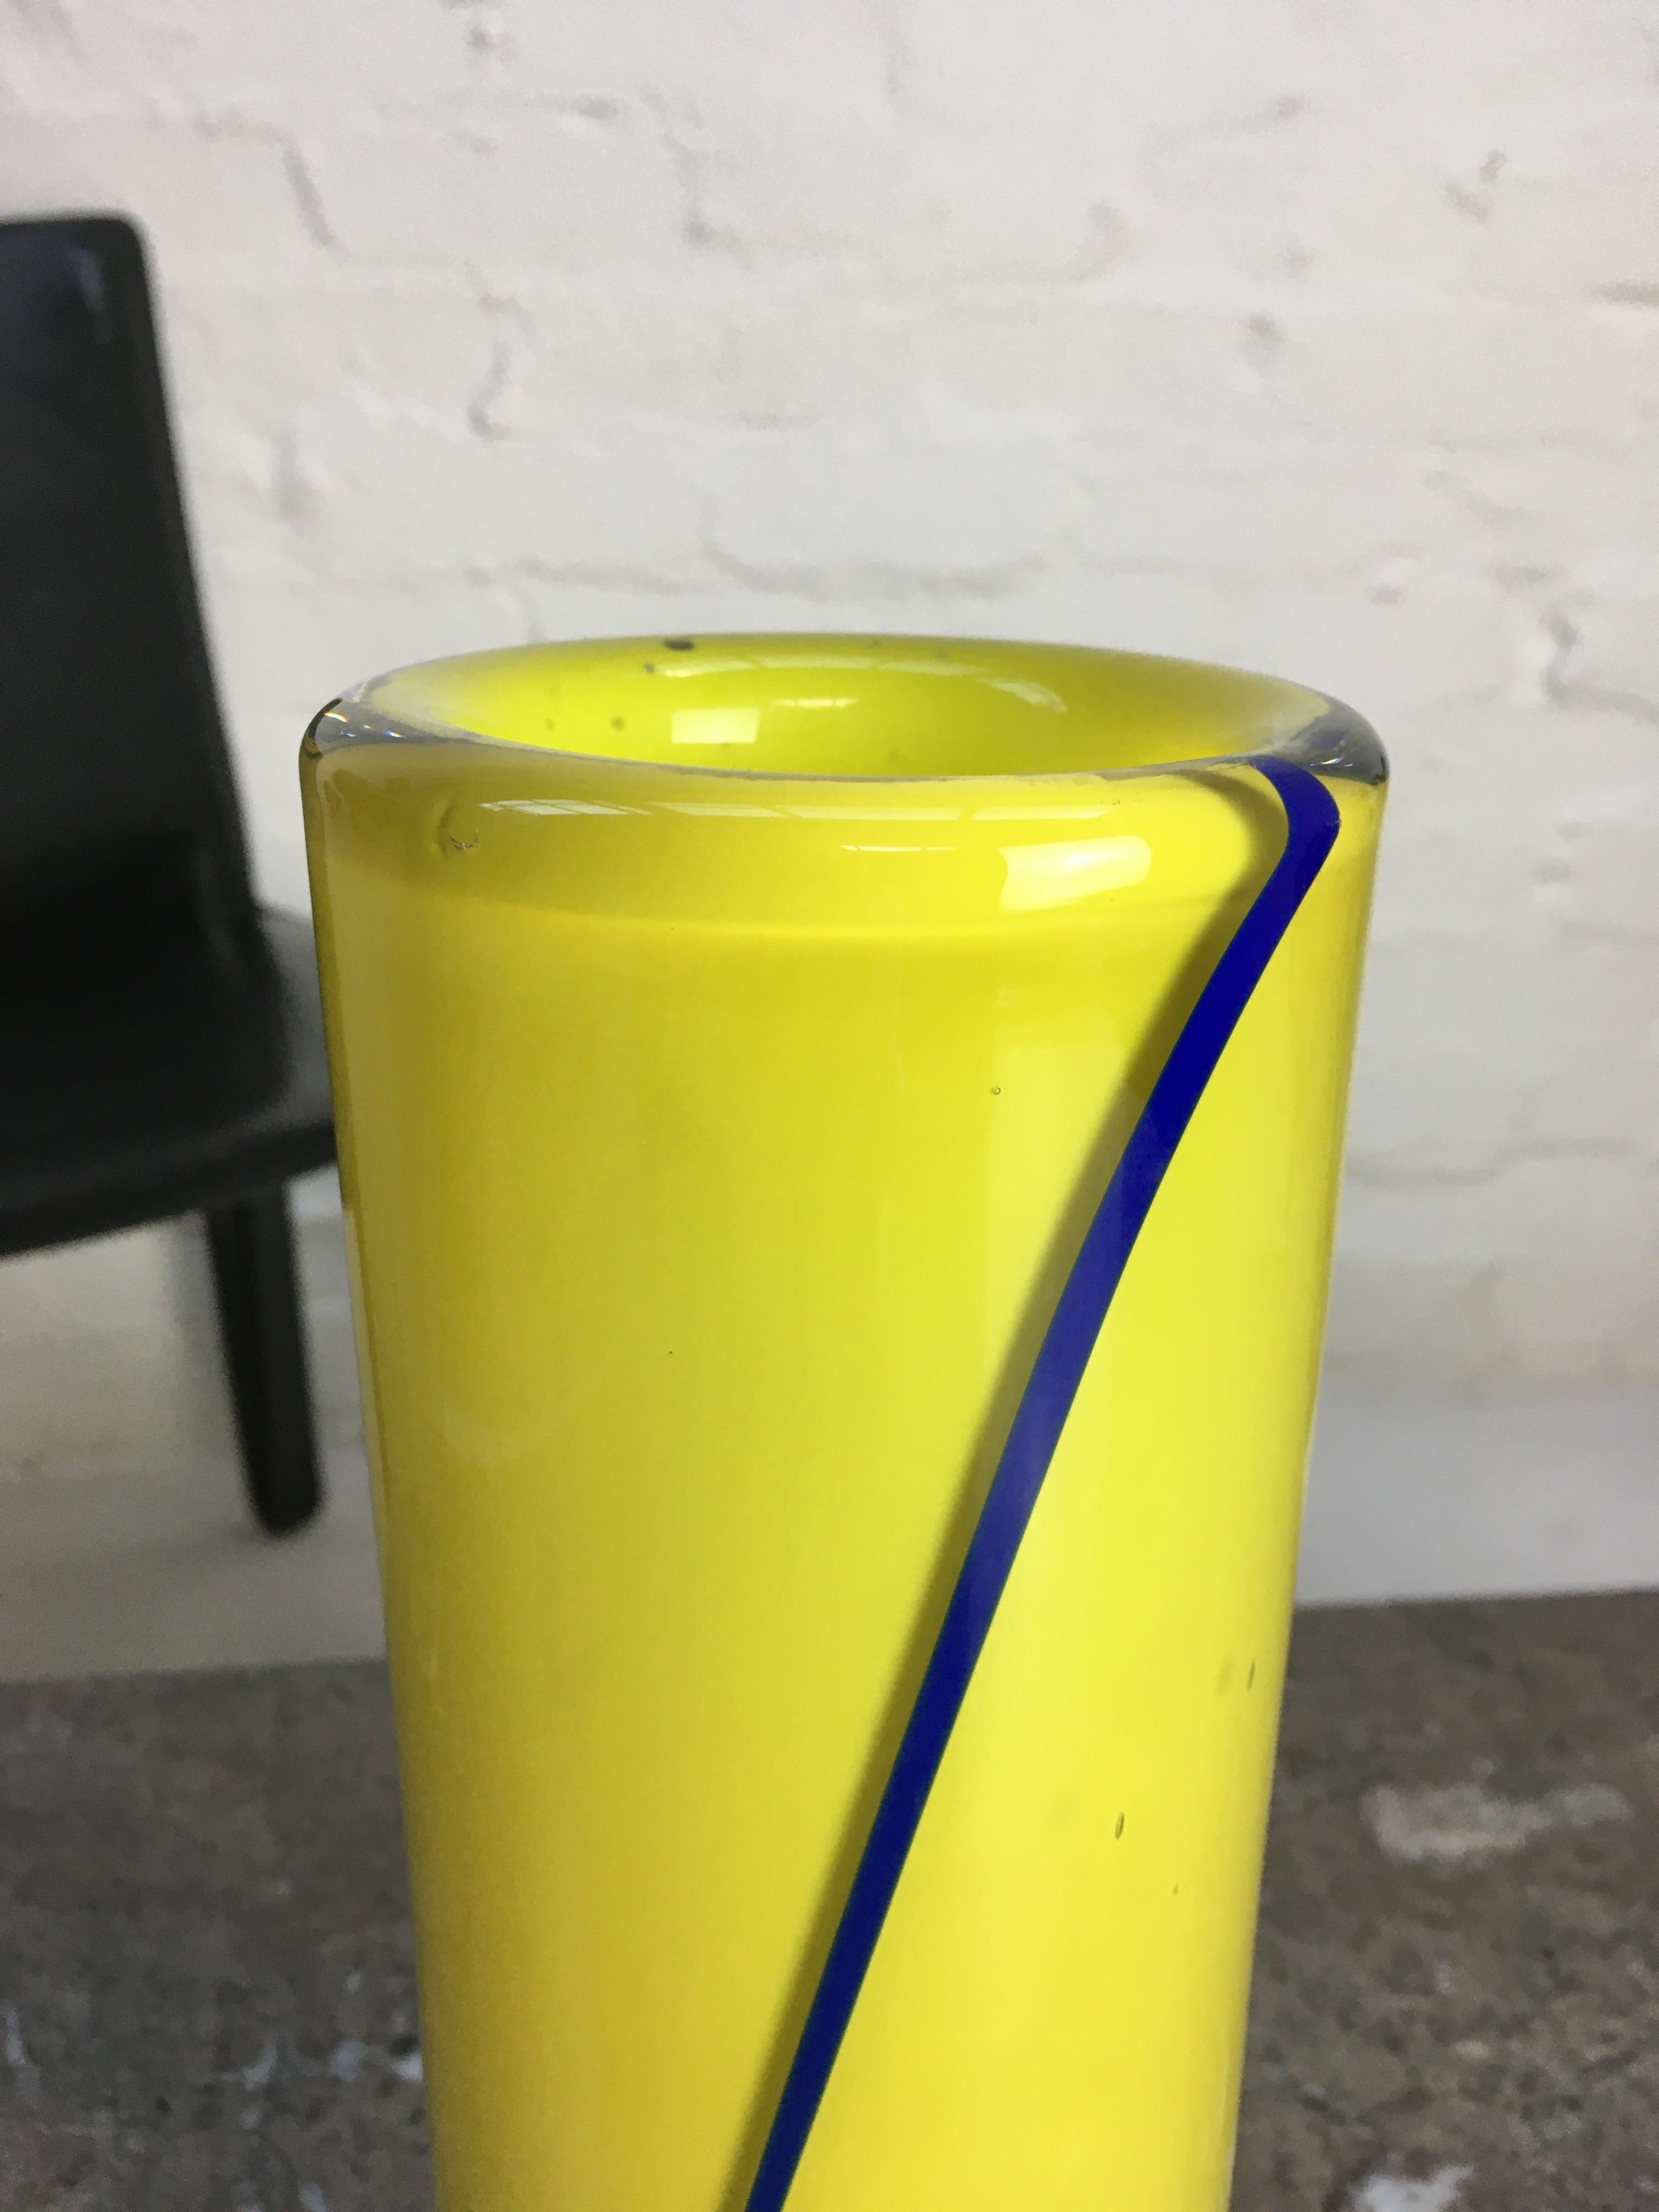 Mid-Century Modern Olle Alberius Orrefors Exhibition Vase Signed Numbered 1973 Acid Yellow Cobalt For Sale